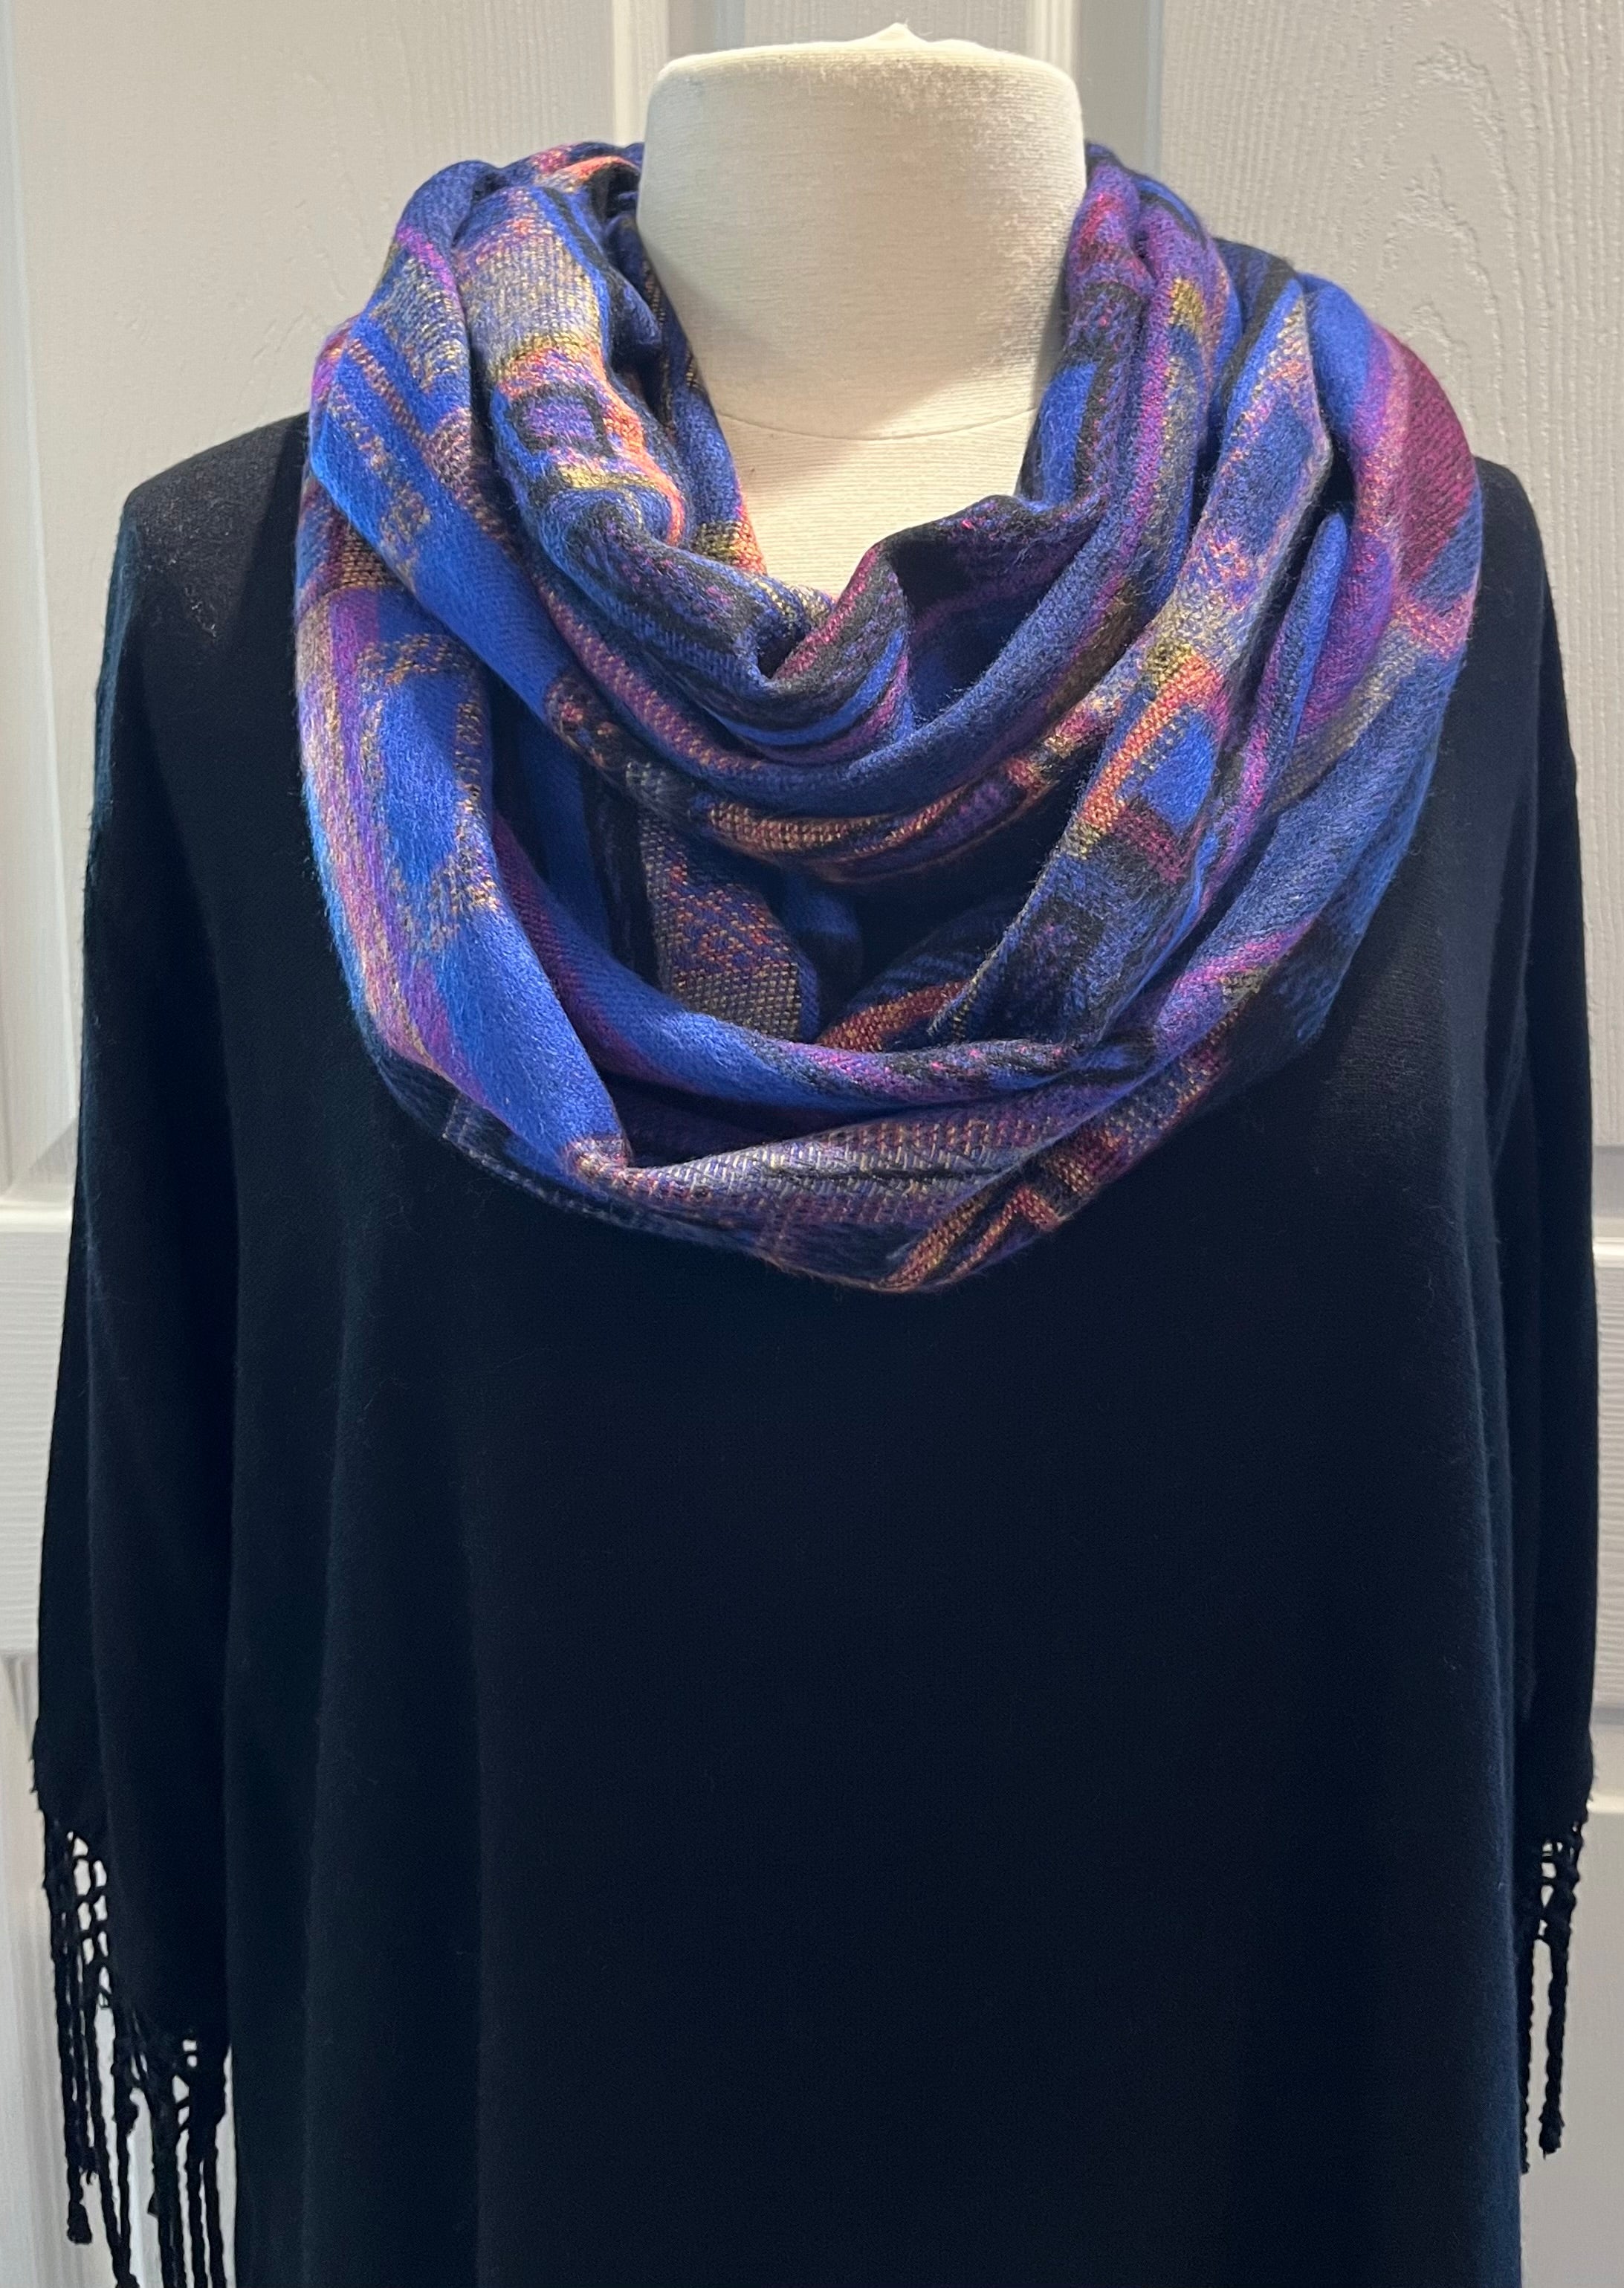 Purple Shades Reversible Cashmere Scarf